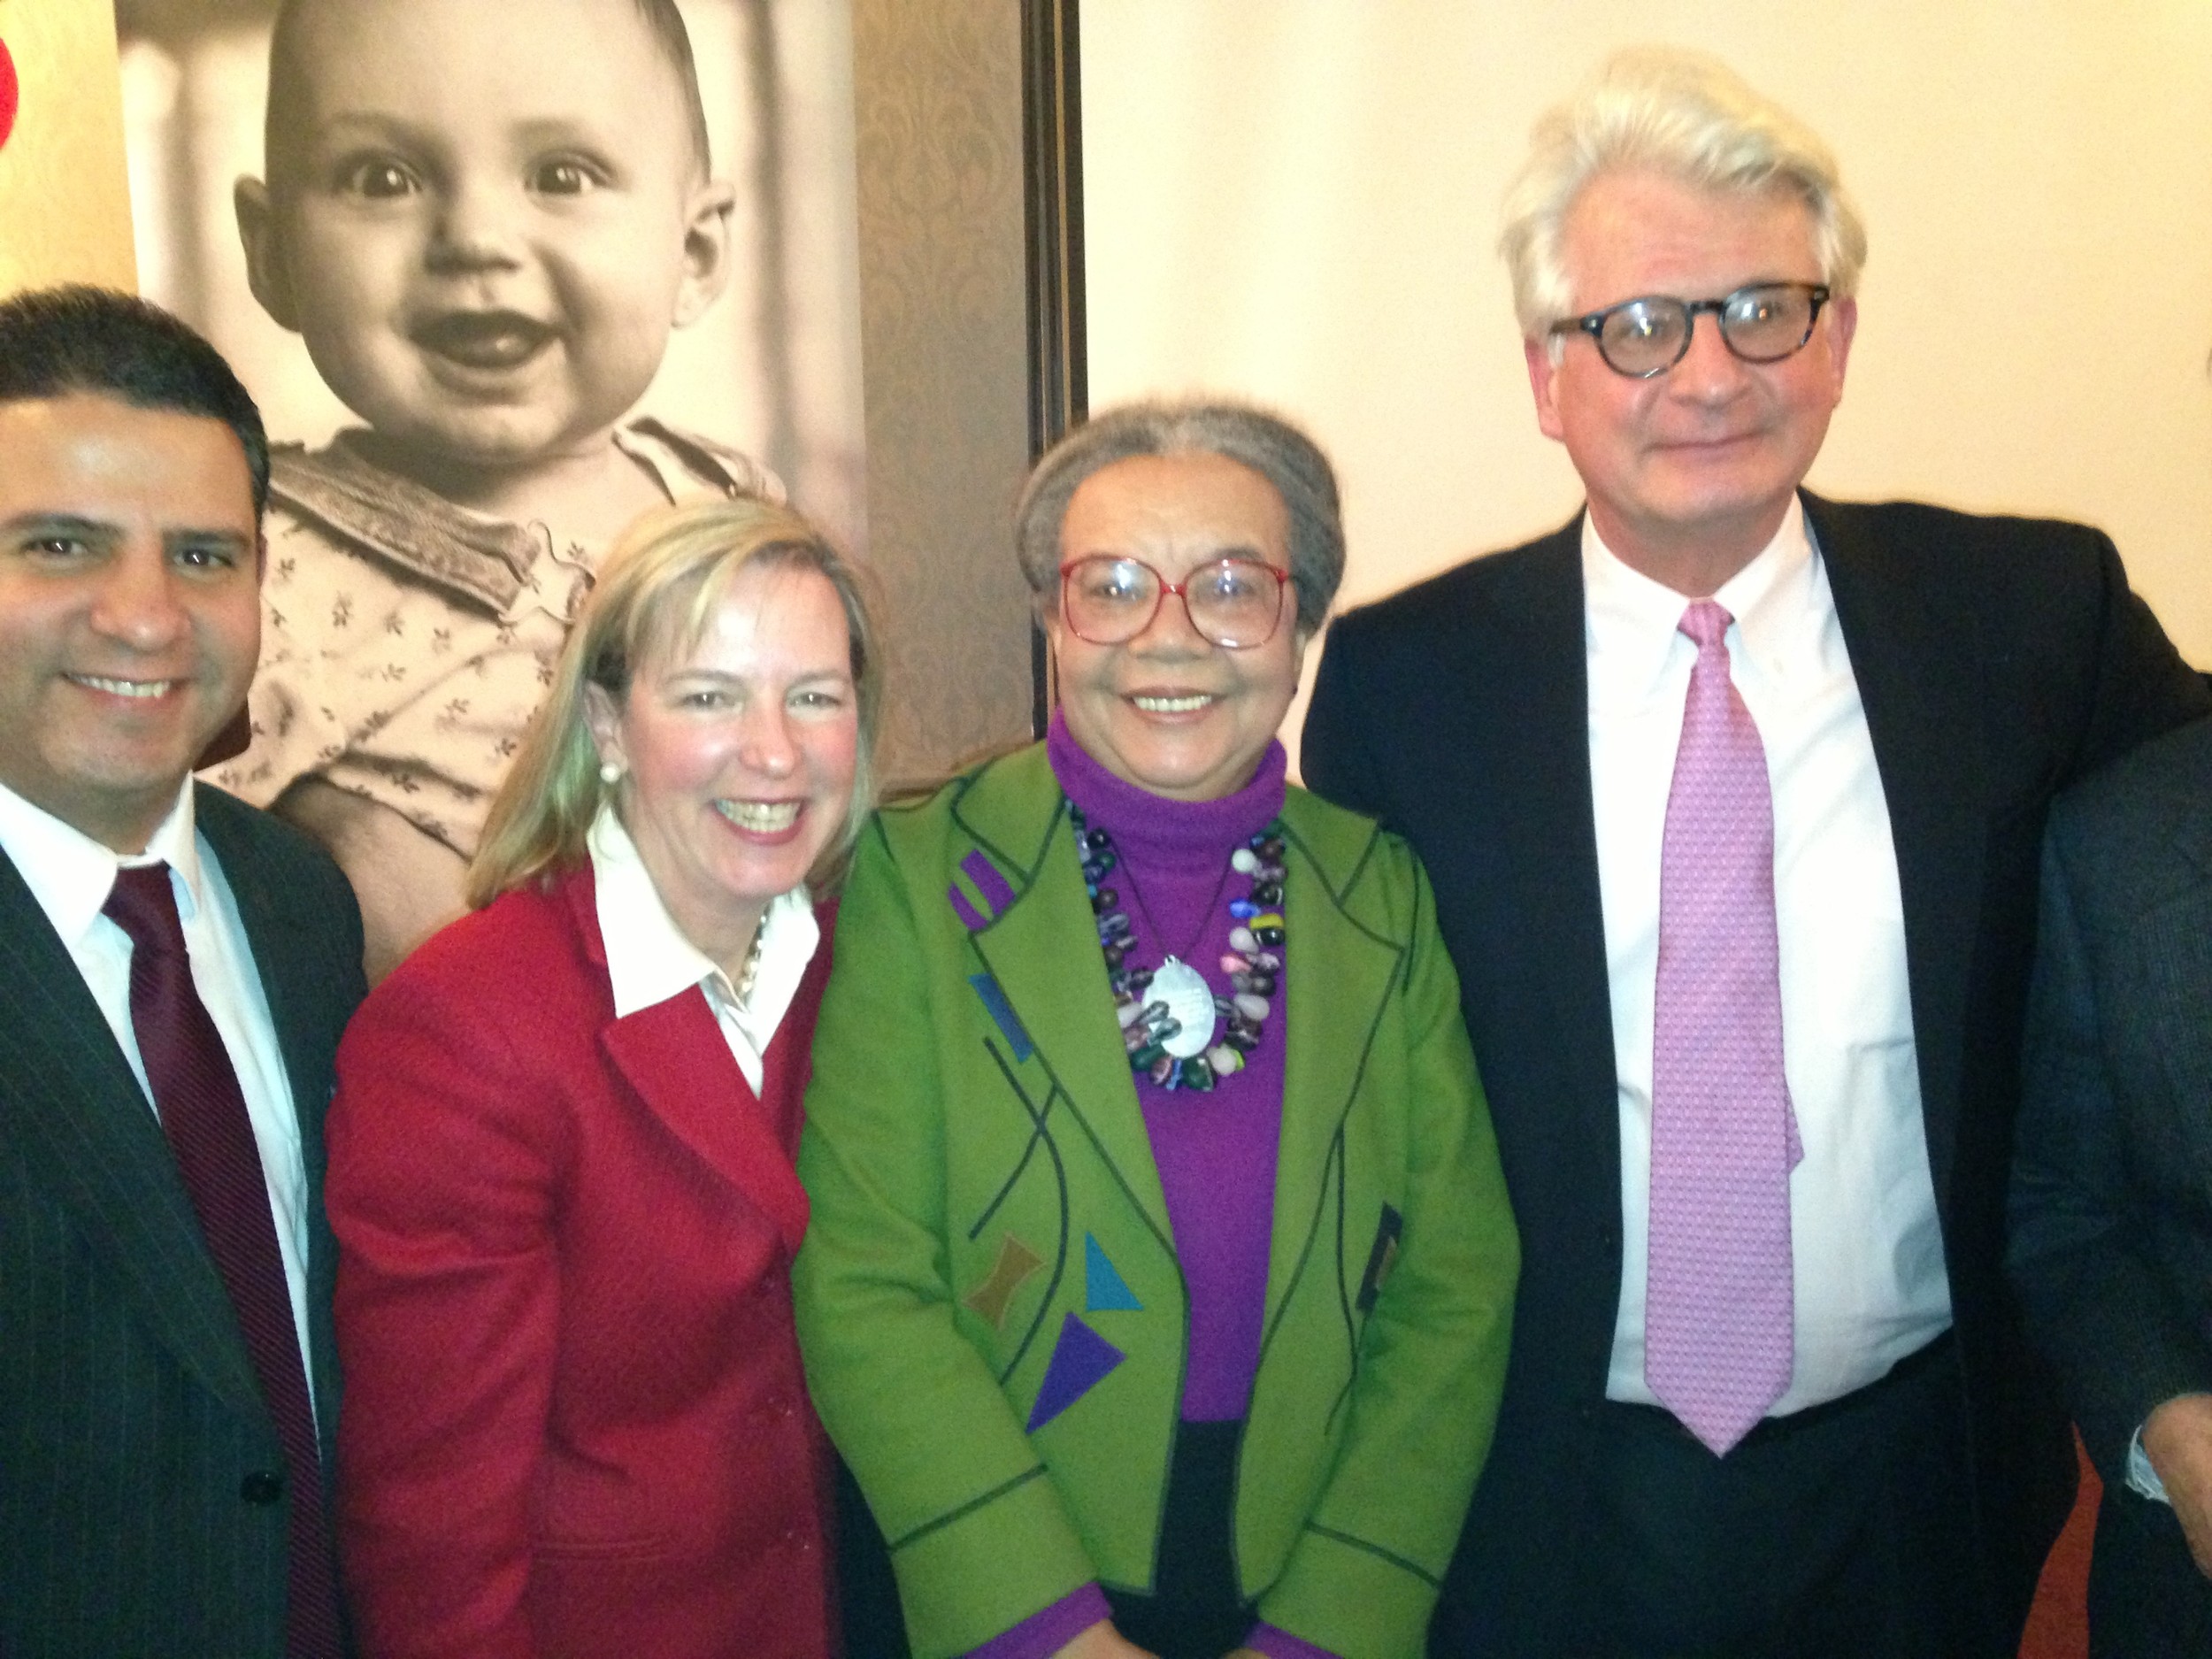 Rhode Island Kids Count celebrated its 20 anniversary on Jan. 29 with a keynote address by Marian Wright Edelman, founder of the Children's Defense Fund. From left, Victor Capellan, board chair, Elizabeth Burke Bryant, executive director, Marian Wright Edelman, and William J. Allen, former board chair.